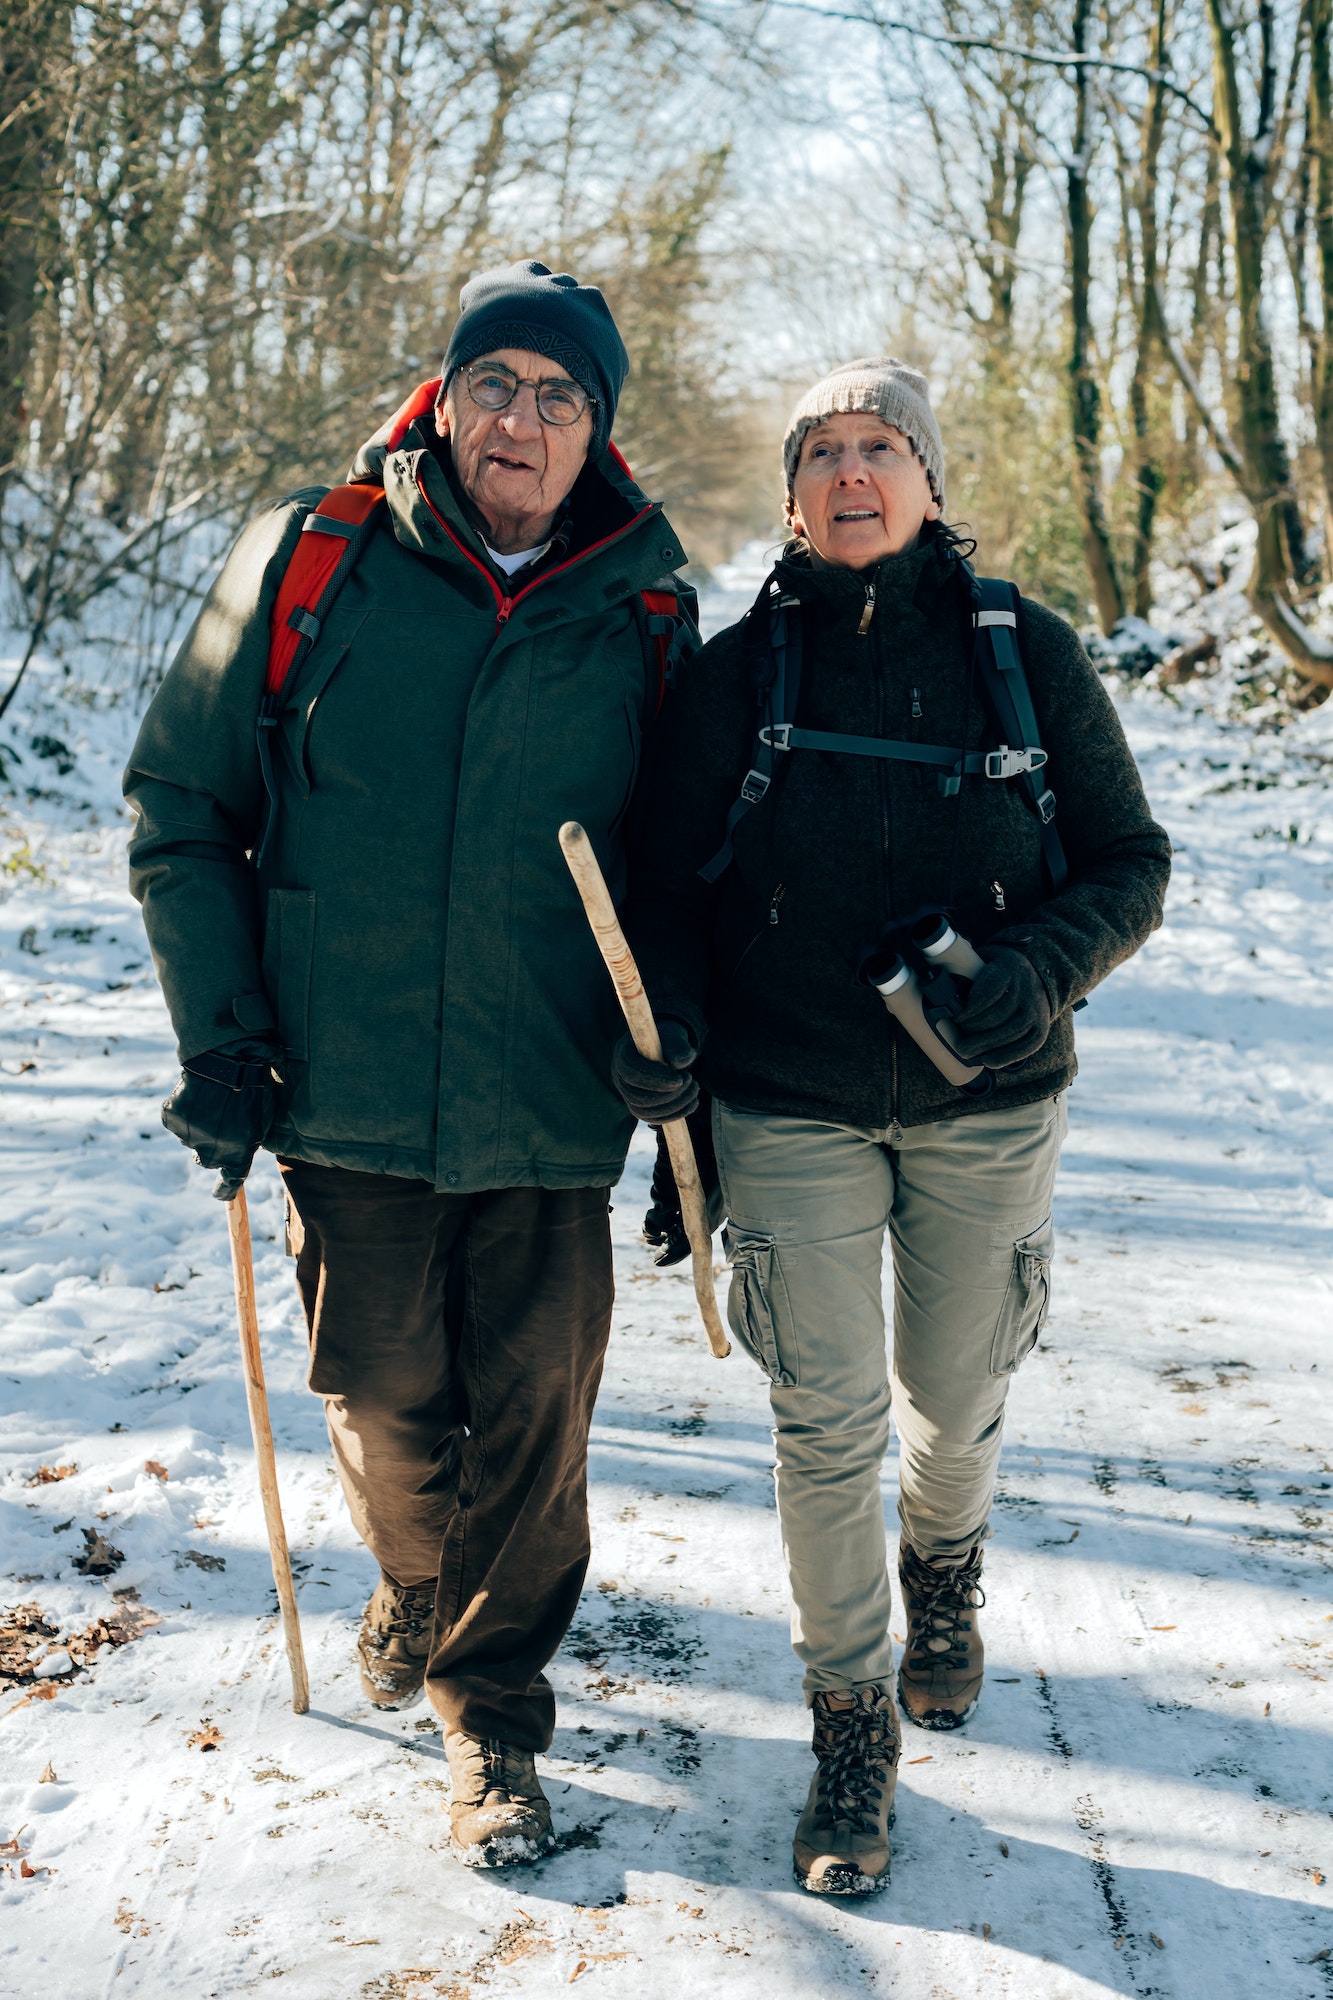 couple older people enjoy the outdoor activity - winter walking in the snowy wood